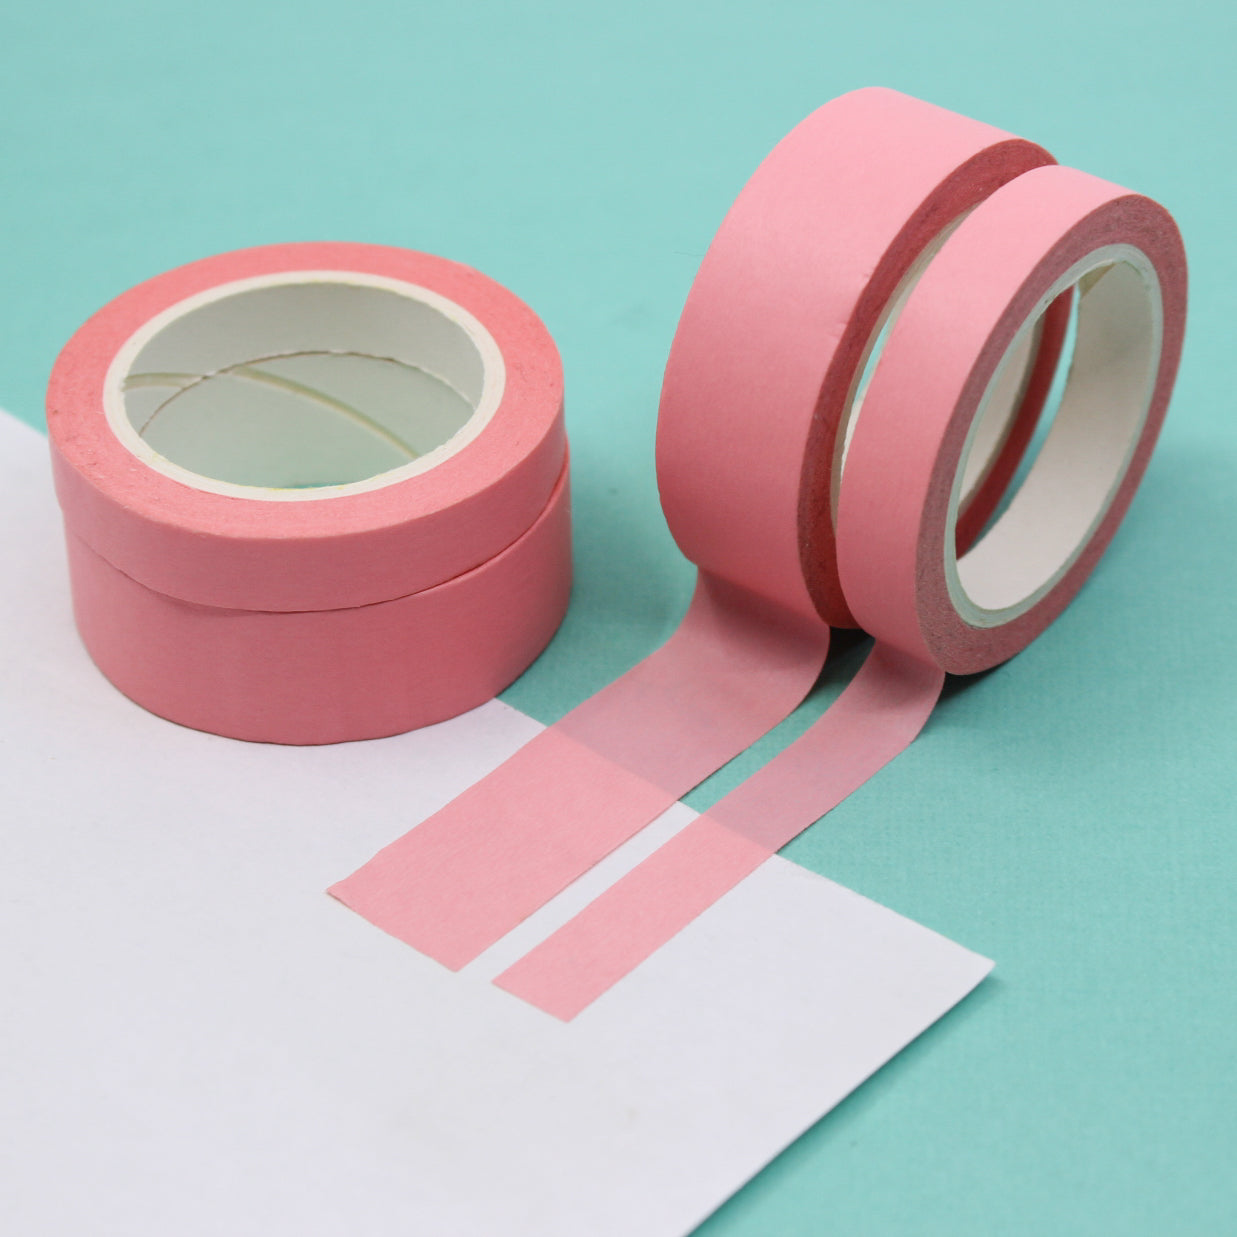 This pastel pink washi tape is vibrant and fun. This washi tape is part of our solid neon thick-thin matching duo washi collection. Find the perfect color for any project in BBB Supplies' thick-thin solids collection, from neon to neutral to pastel and more. This tape is sold at BBB Supplies Craft Shop.